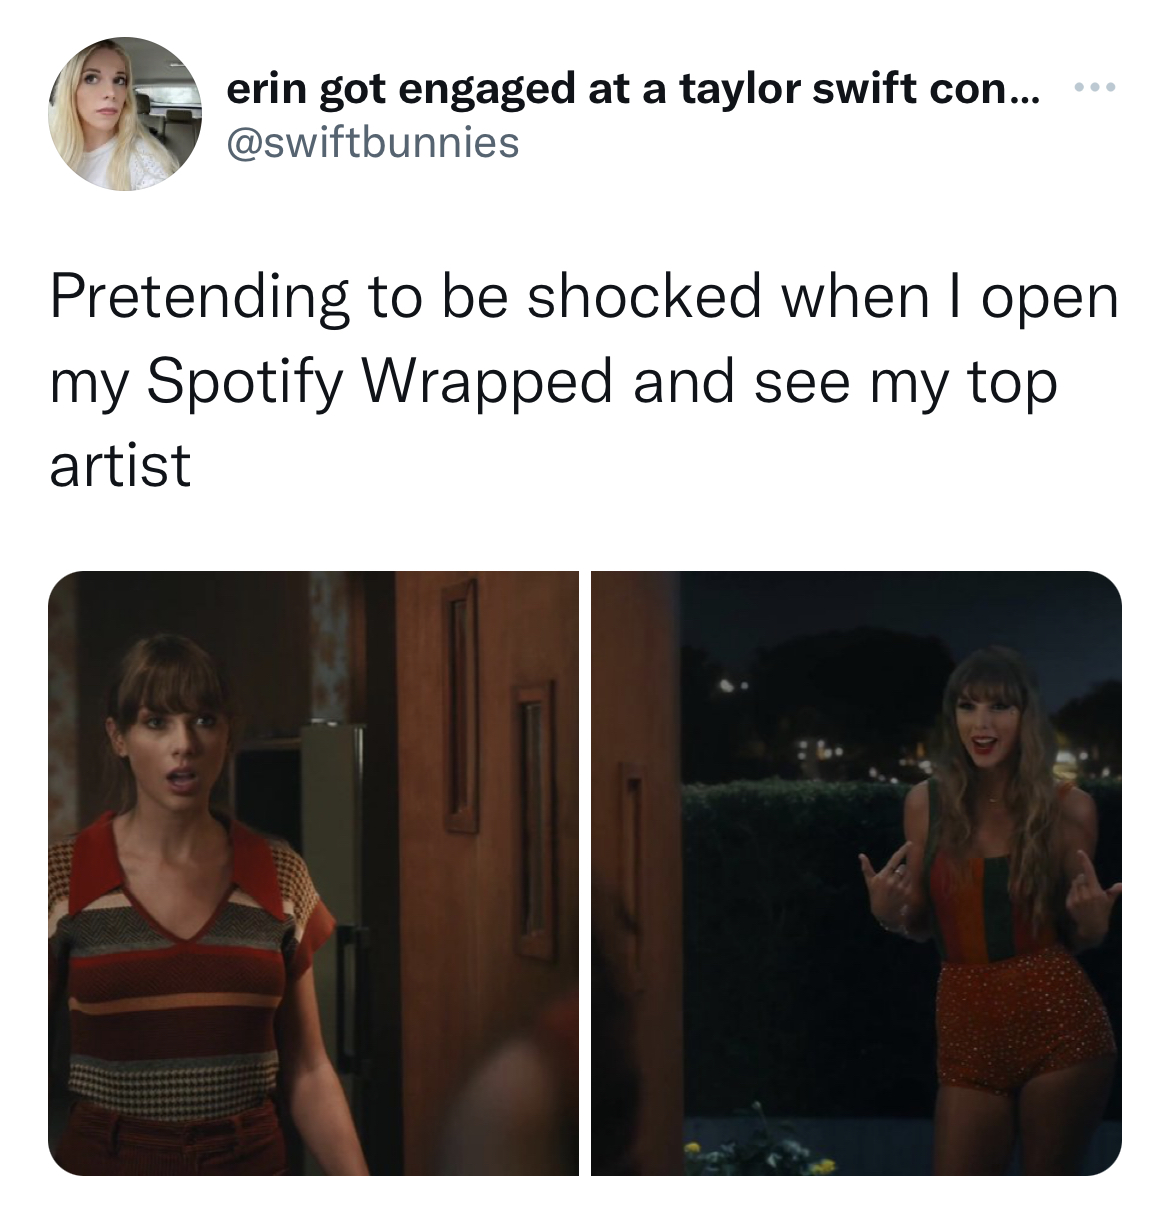 Spotify Wrapped Memes - presentation - erin got engaged at a taylor swift con... Pretending to be shocked when I open my Spotify Wrapped and see my top artist